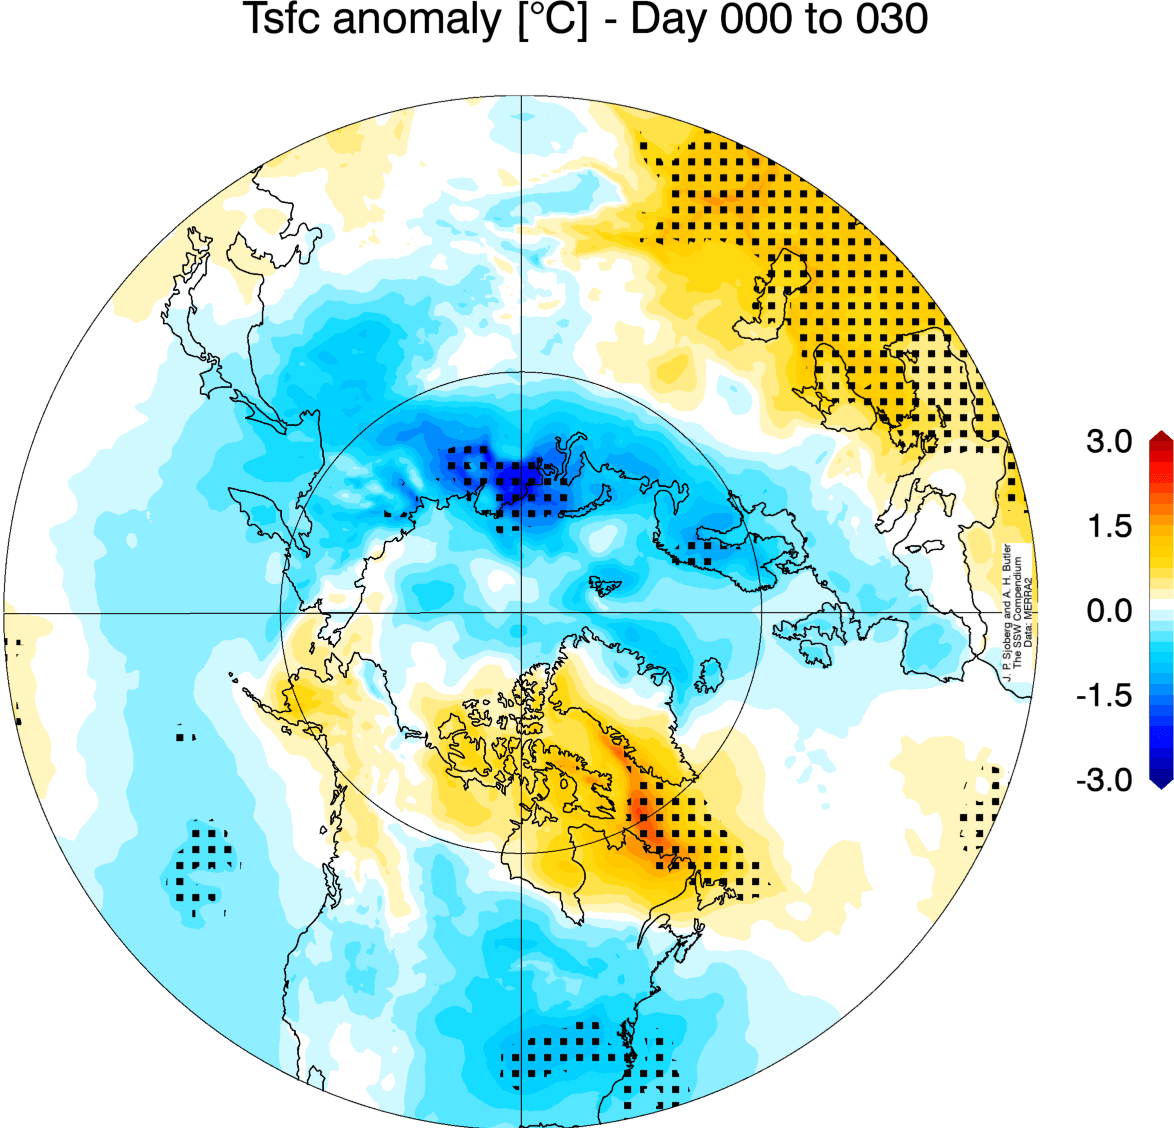 stratospheric-warming-event-surface-weather-temperature-change-united-states-canada-pattern-anomaly-2024